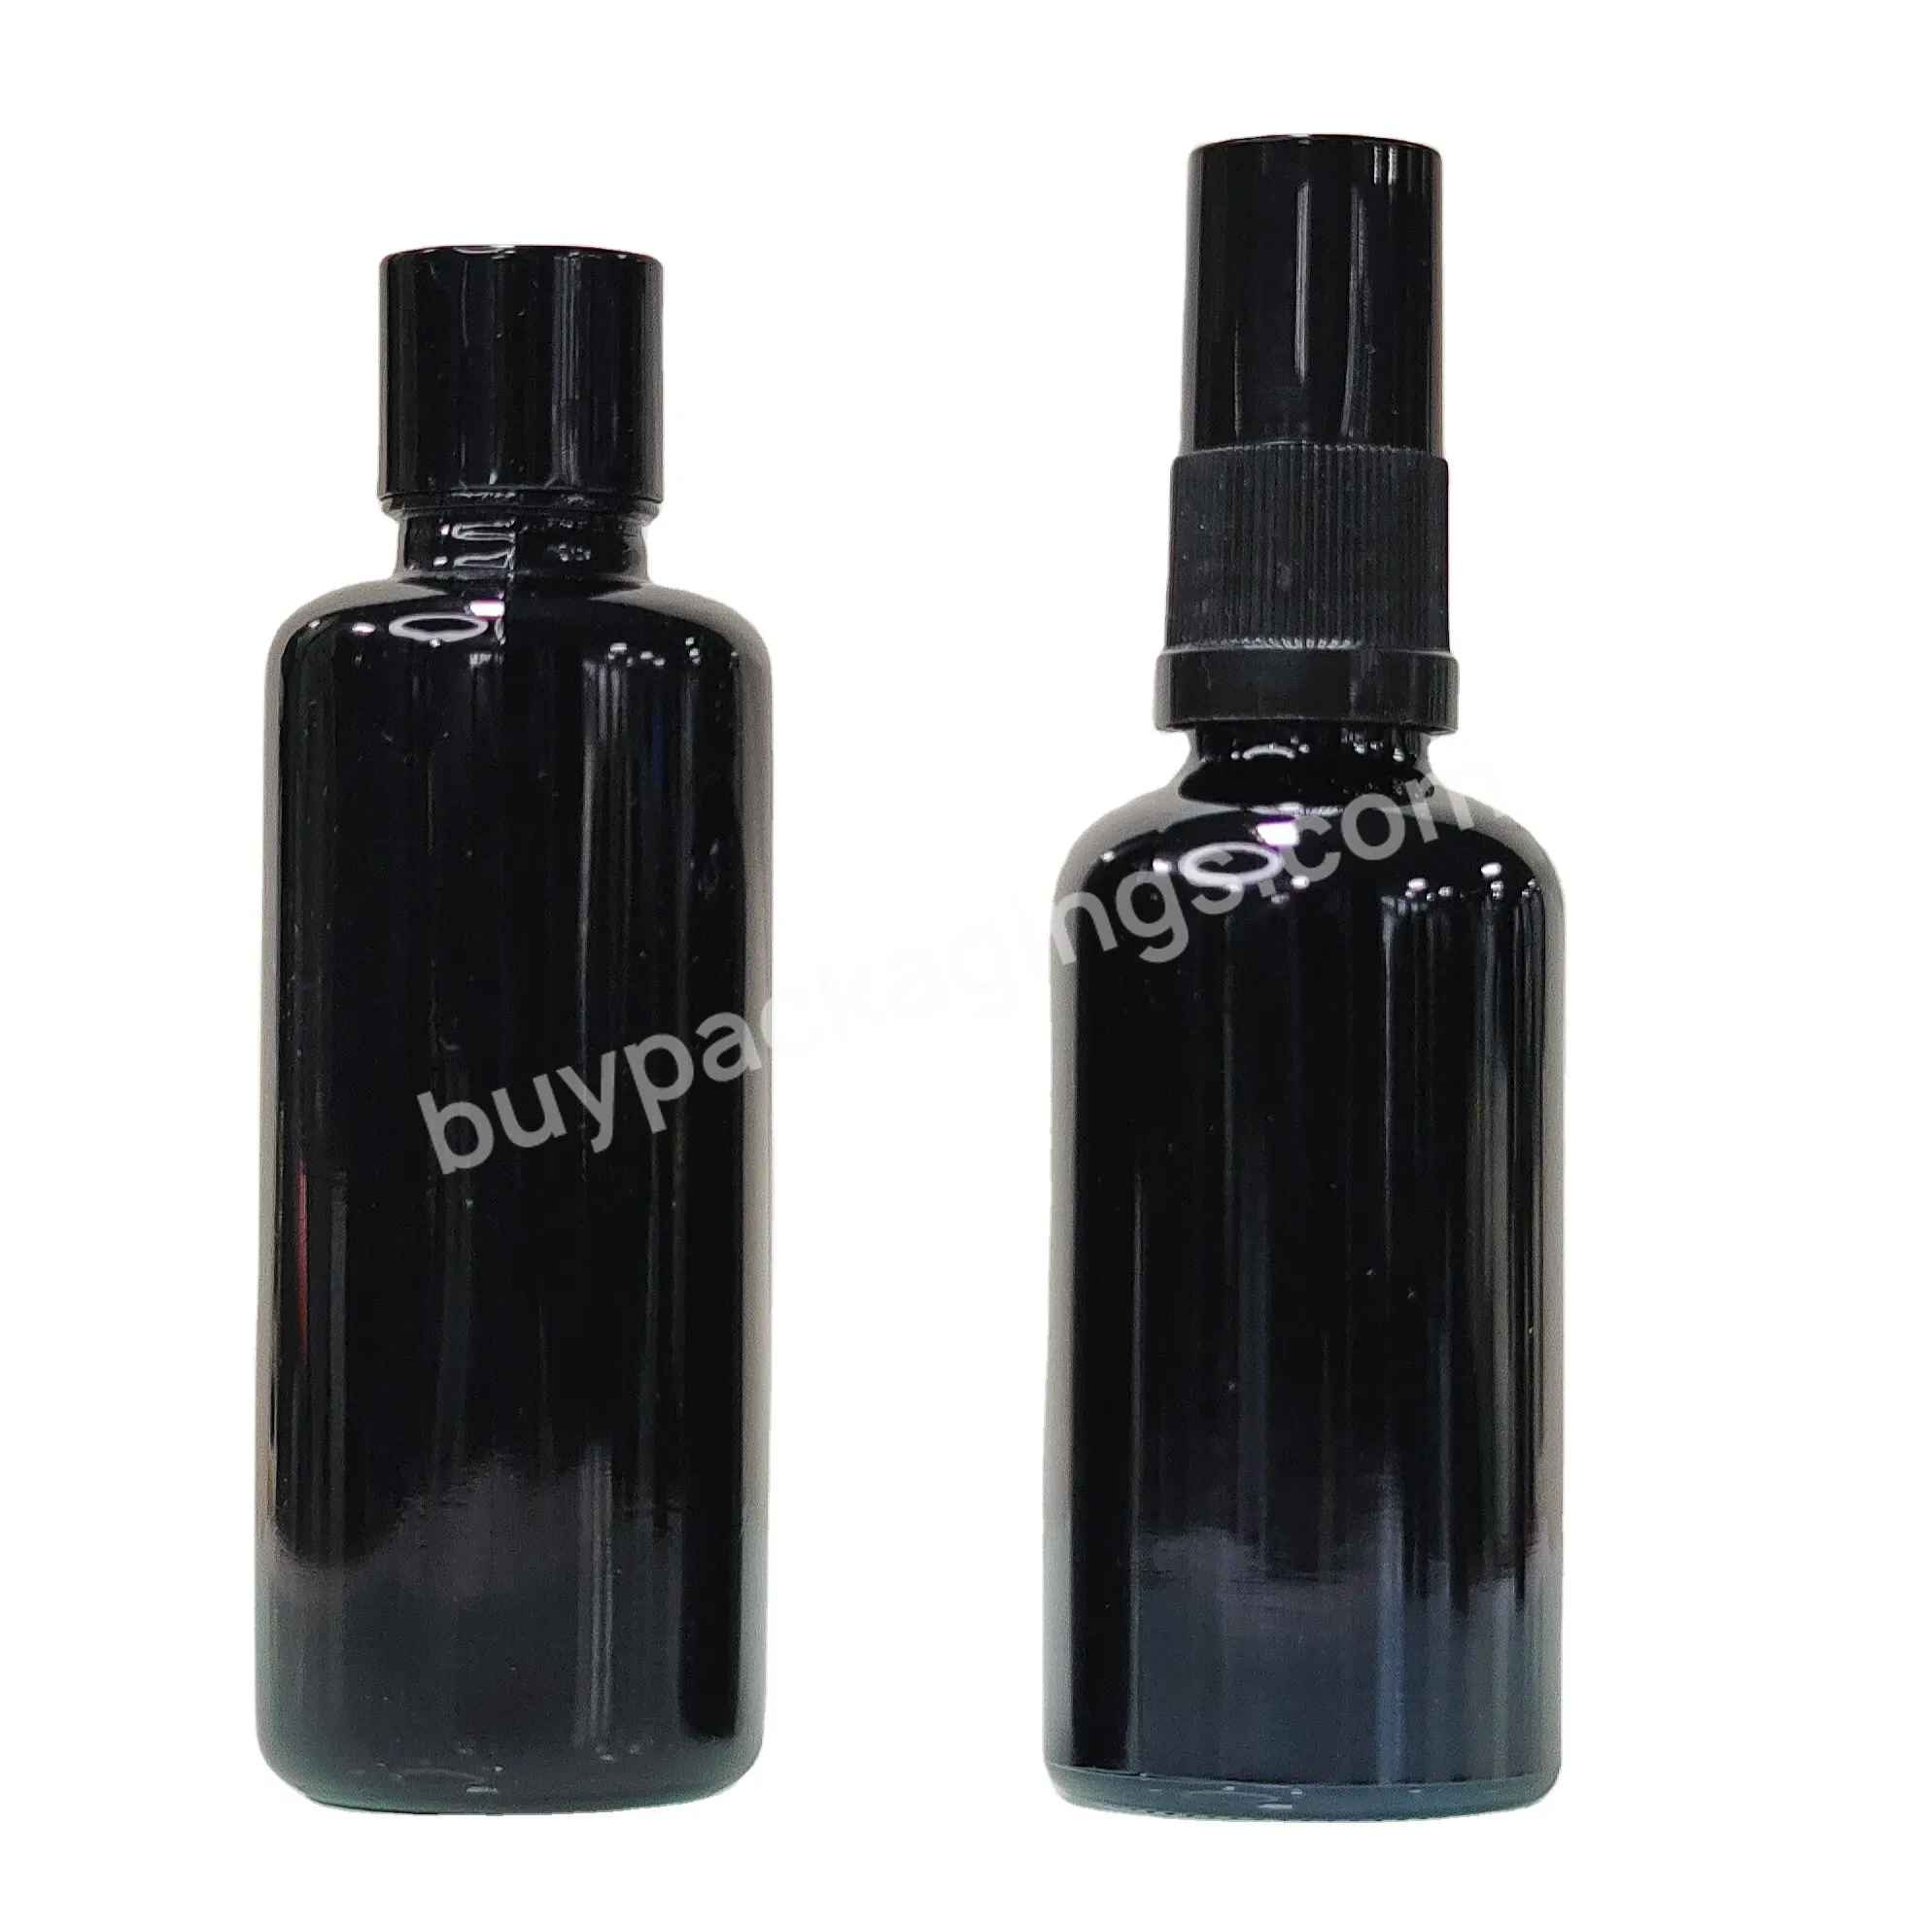 Proof Uv Empty Cosmetic Container Black 15ml 30ml 50ml 100ml Violet Glass Serum Essential Bottles - Buy 30ml Frosted Glass Dropper Serum Bottles,Oil Glass Dropper Bottles,Cylinder Glass Bottle Dropper.